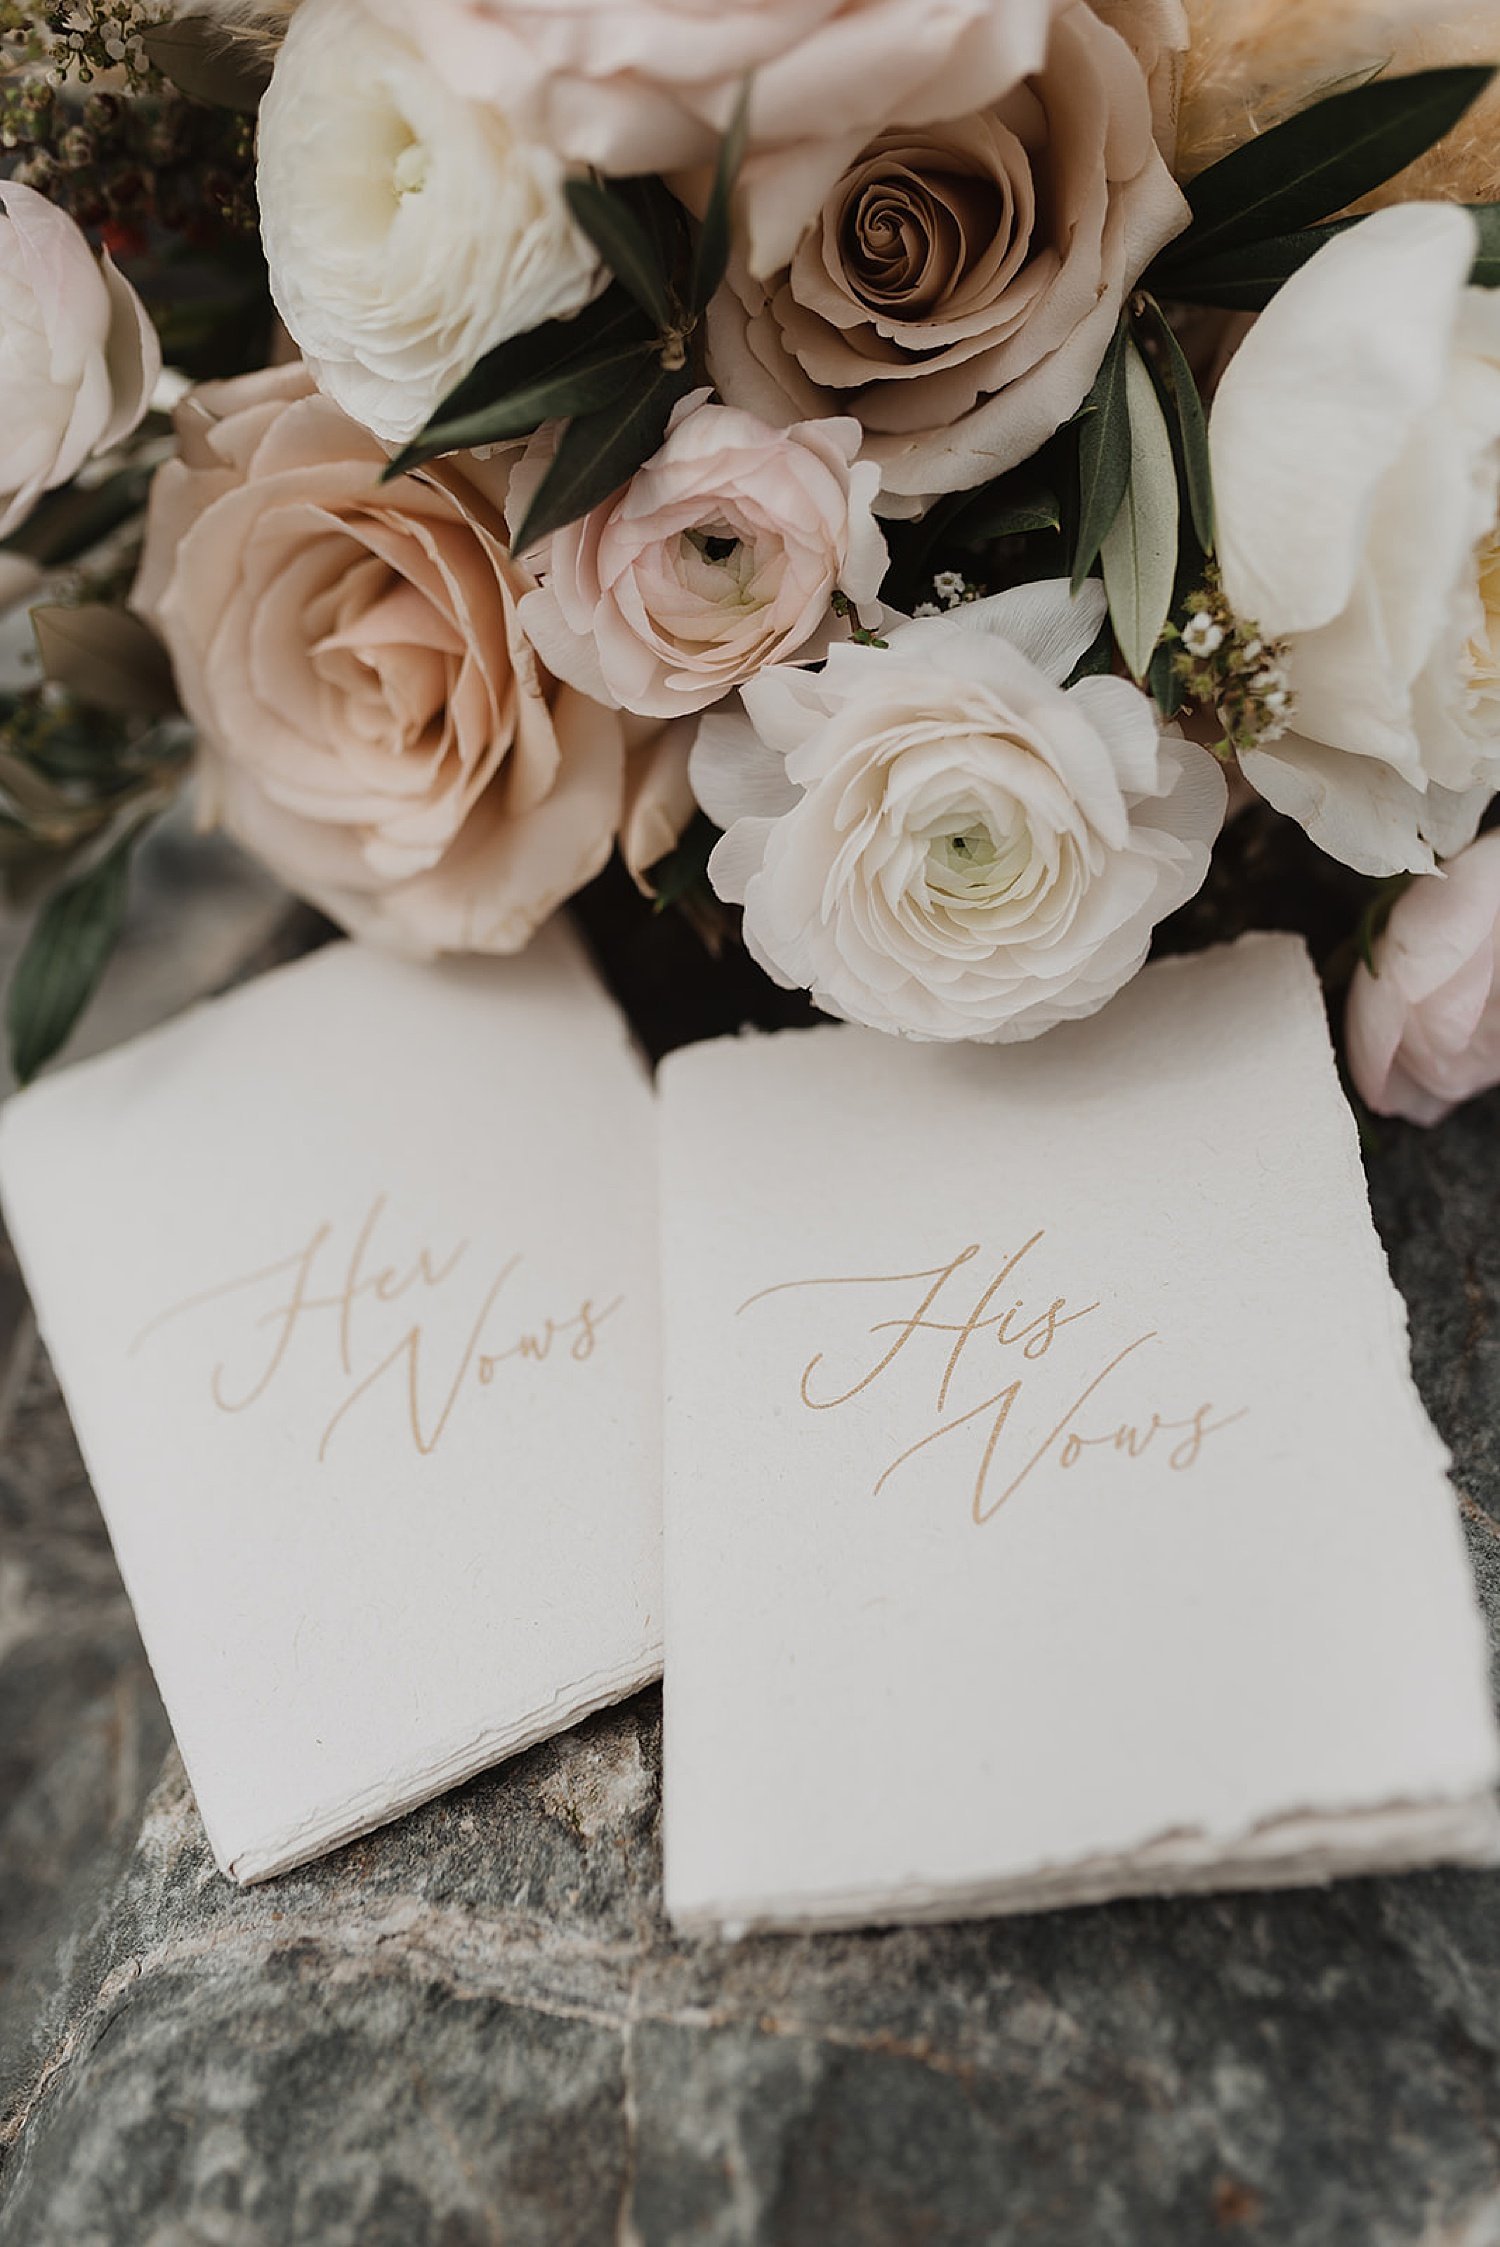  wedding stationary and bouquet from vintage styled shoot by alaska wedding photographer theresa mcdonald 